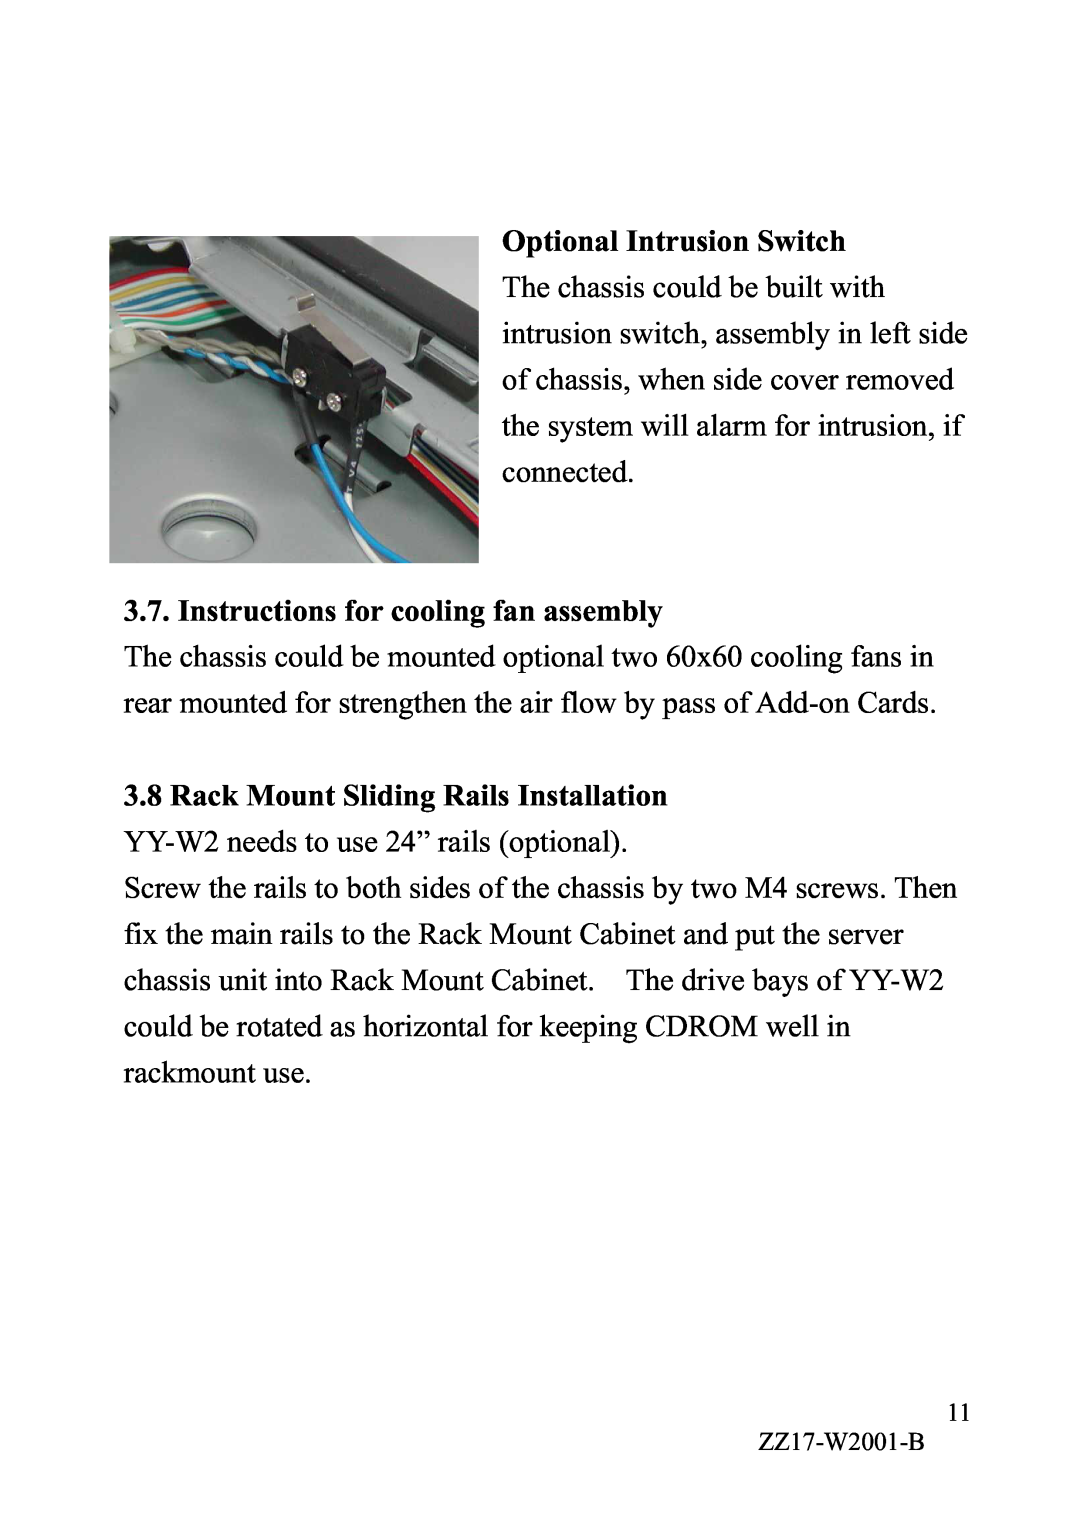 IBM YY-R5xx manual Optional Intrusion Switch, Instructions for cooling fan assembly, Rack Mount Sliding Rails Installation 